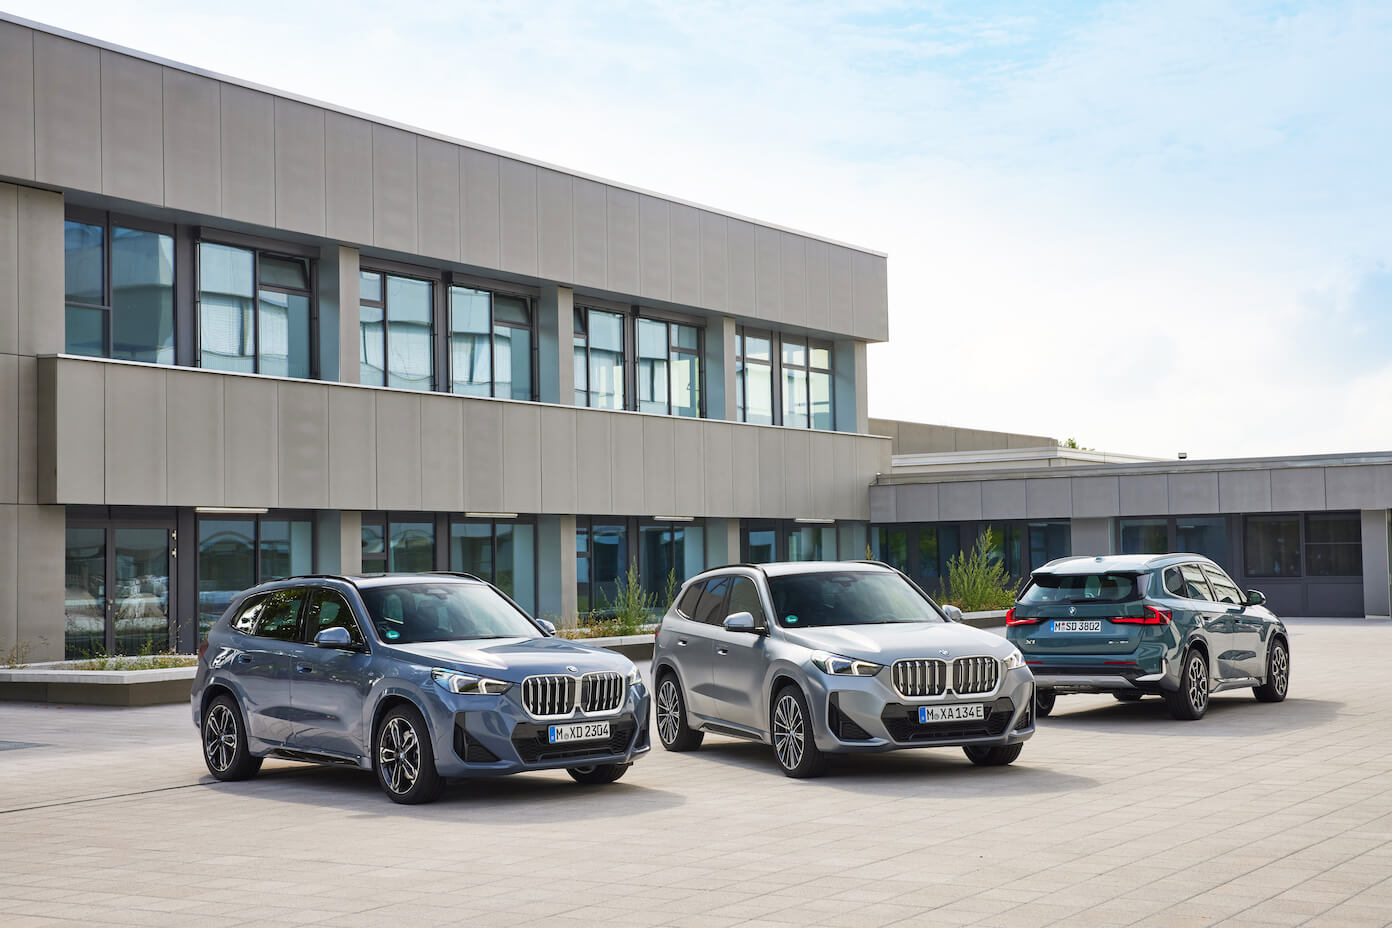 The 2023 BMW X1 among other SUVs in the lineup in front of a modern building. BMW SUV sales are struggling this year.